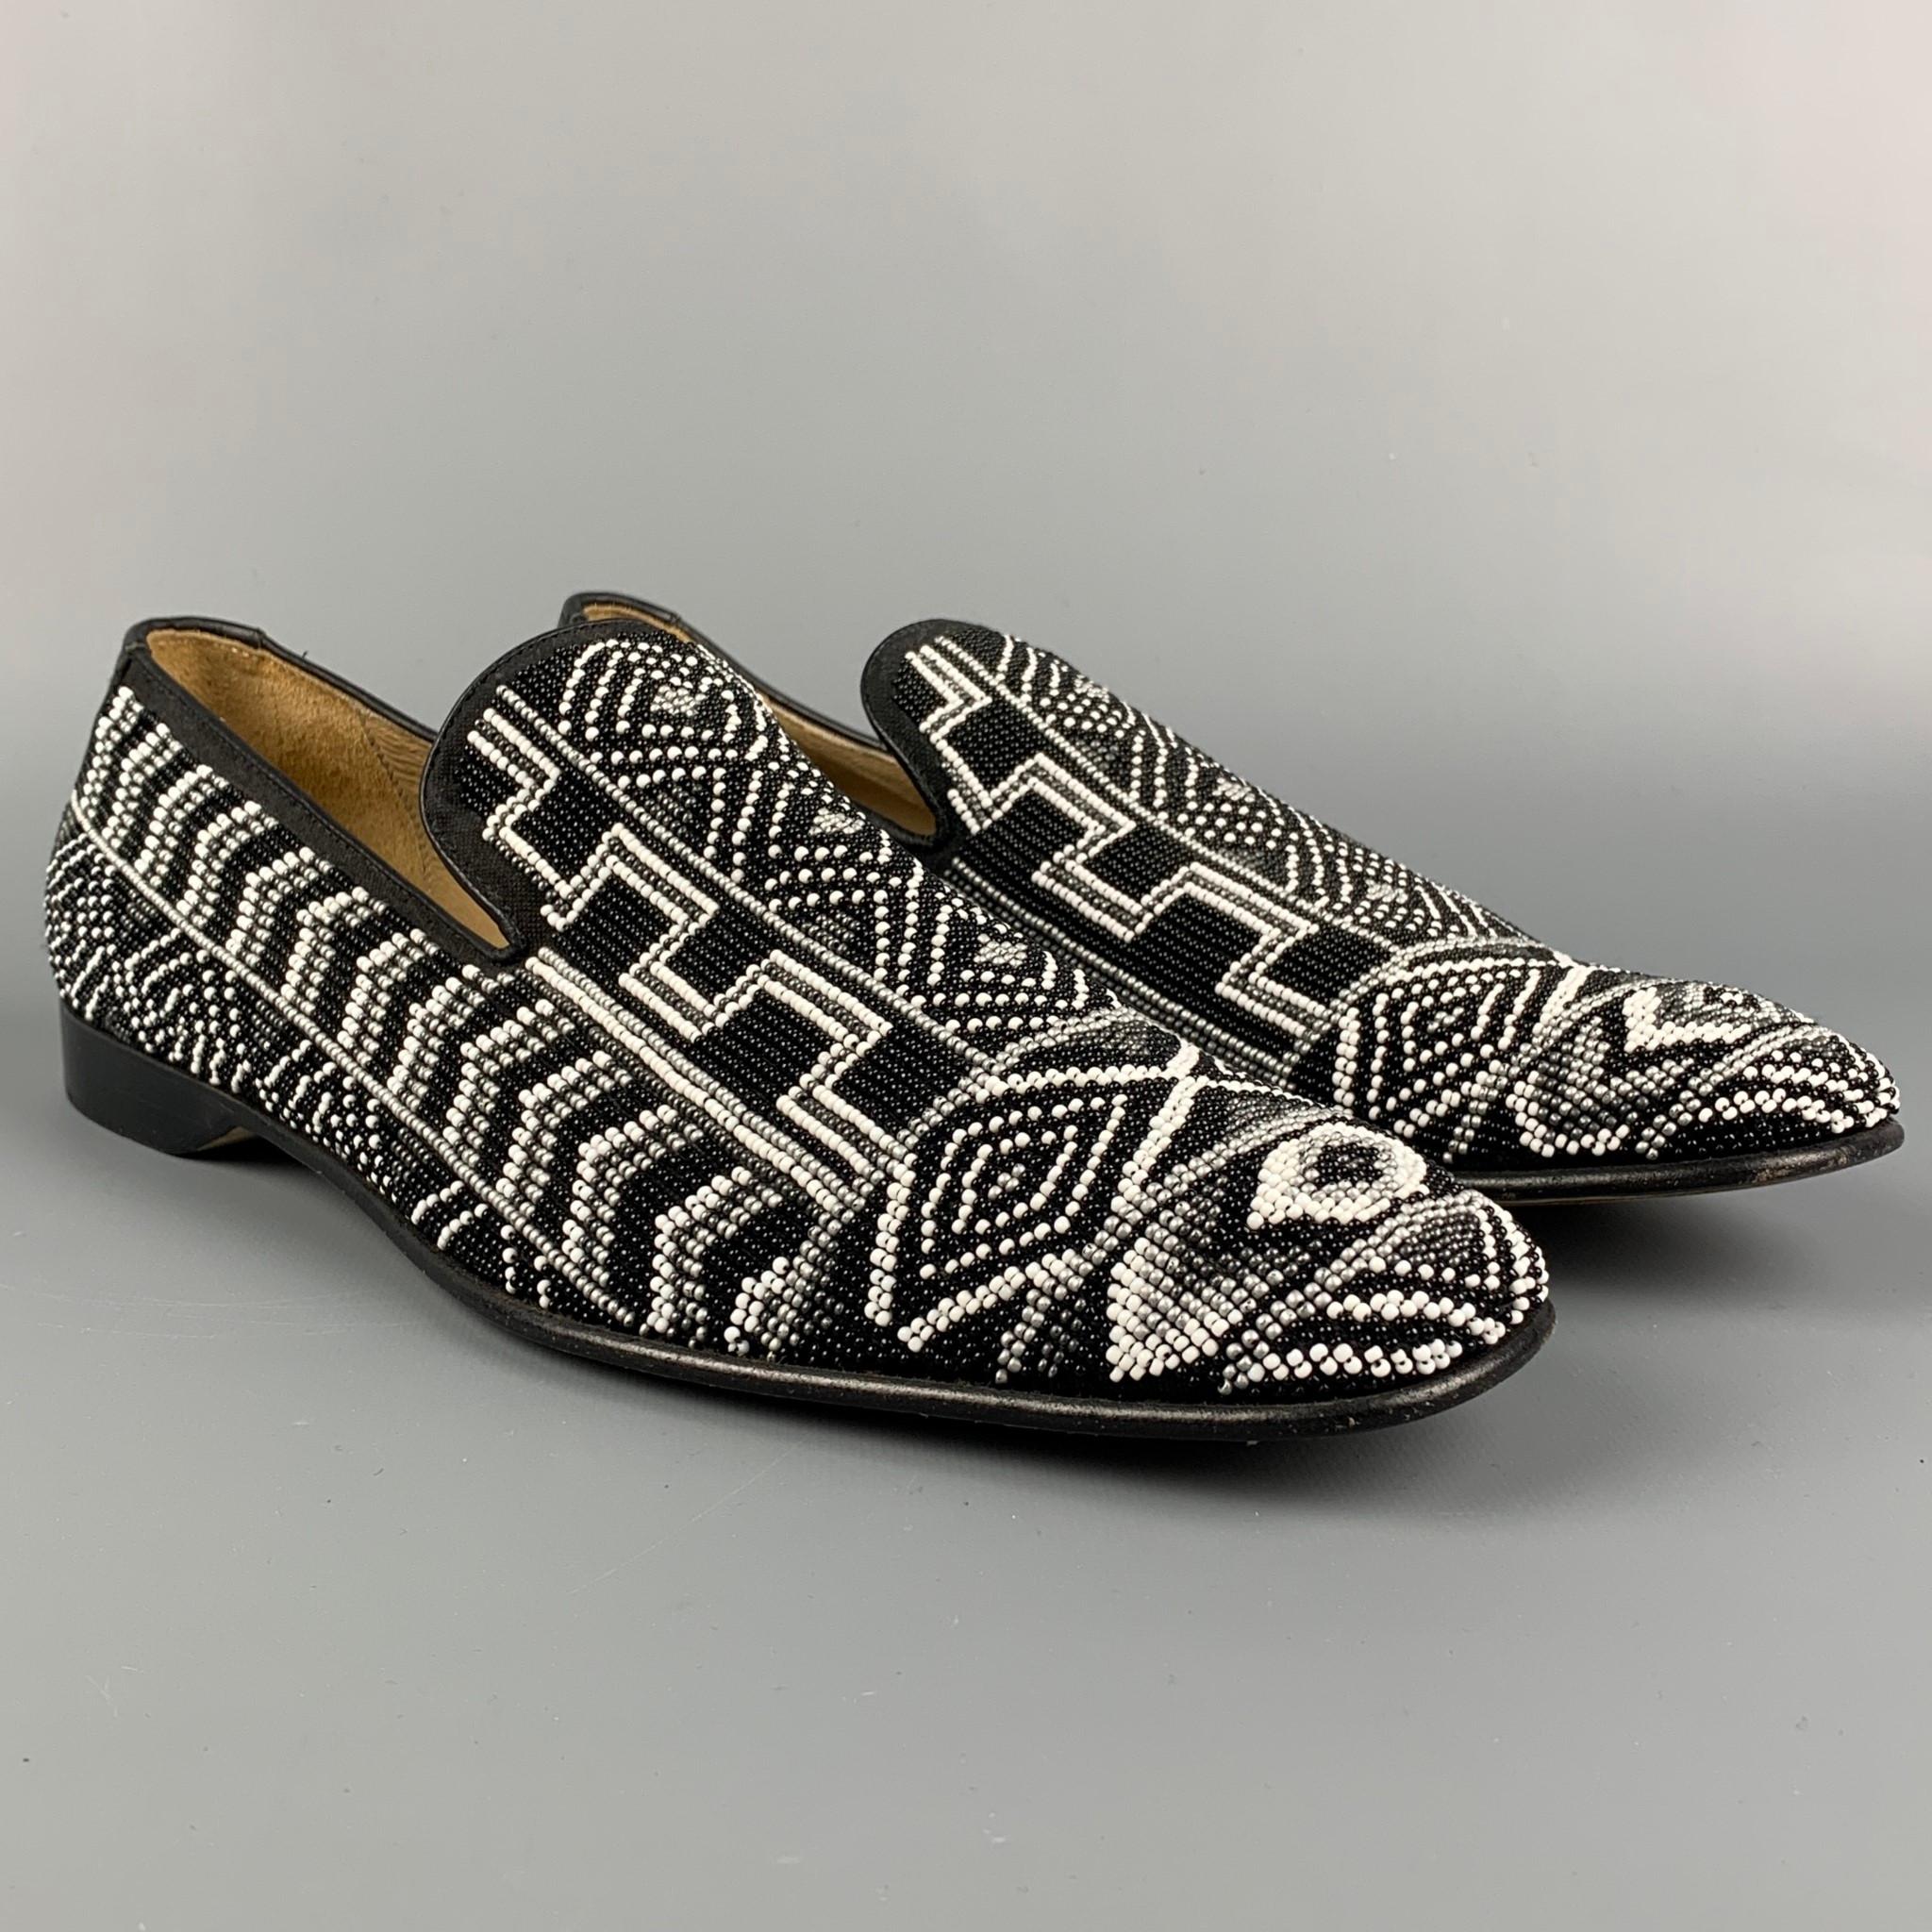 DONALD J PLINER loafers comes in a black & white beaded leather featuring a square toe and s slip on style. Made in Italy. 

Very Good Pre-Owned Condition.
Marked: 10.5 M PONTSP

Outsole: 12.5 in. x 4 in. 